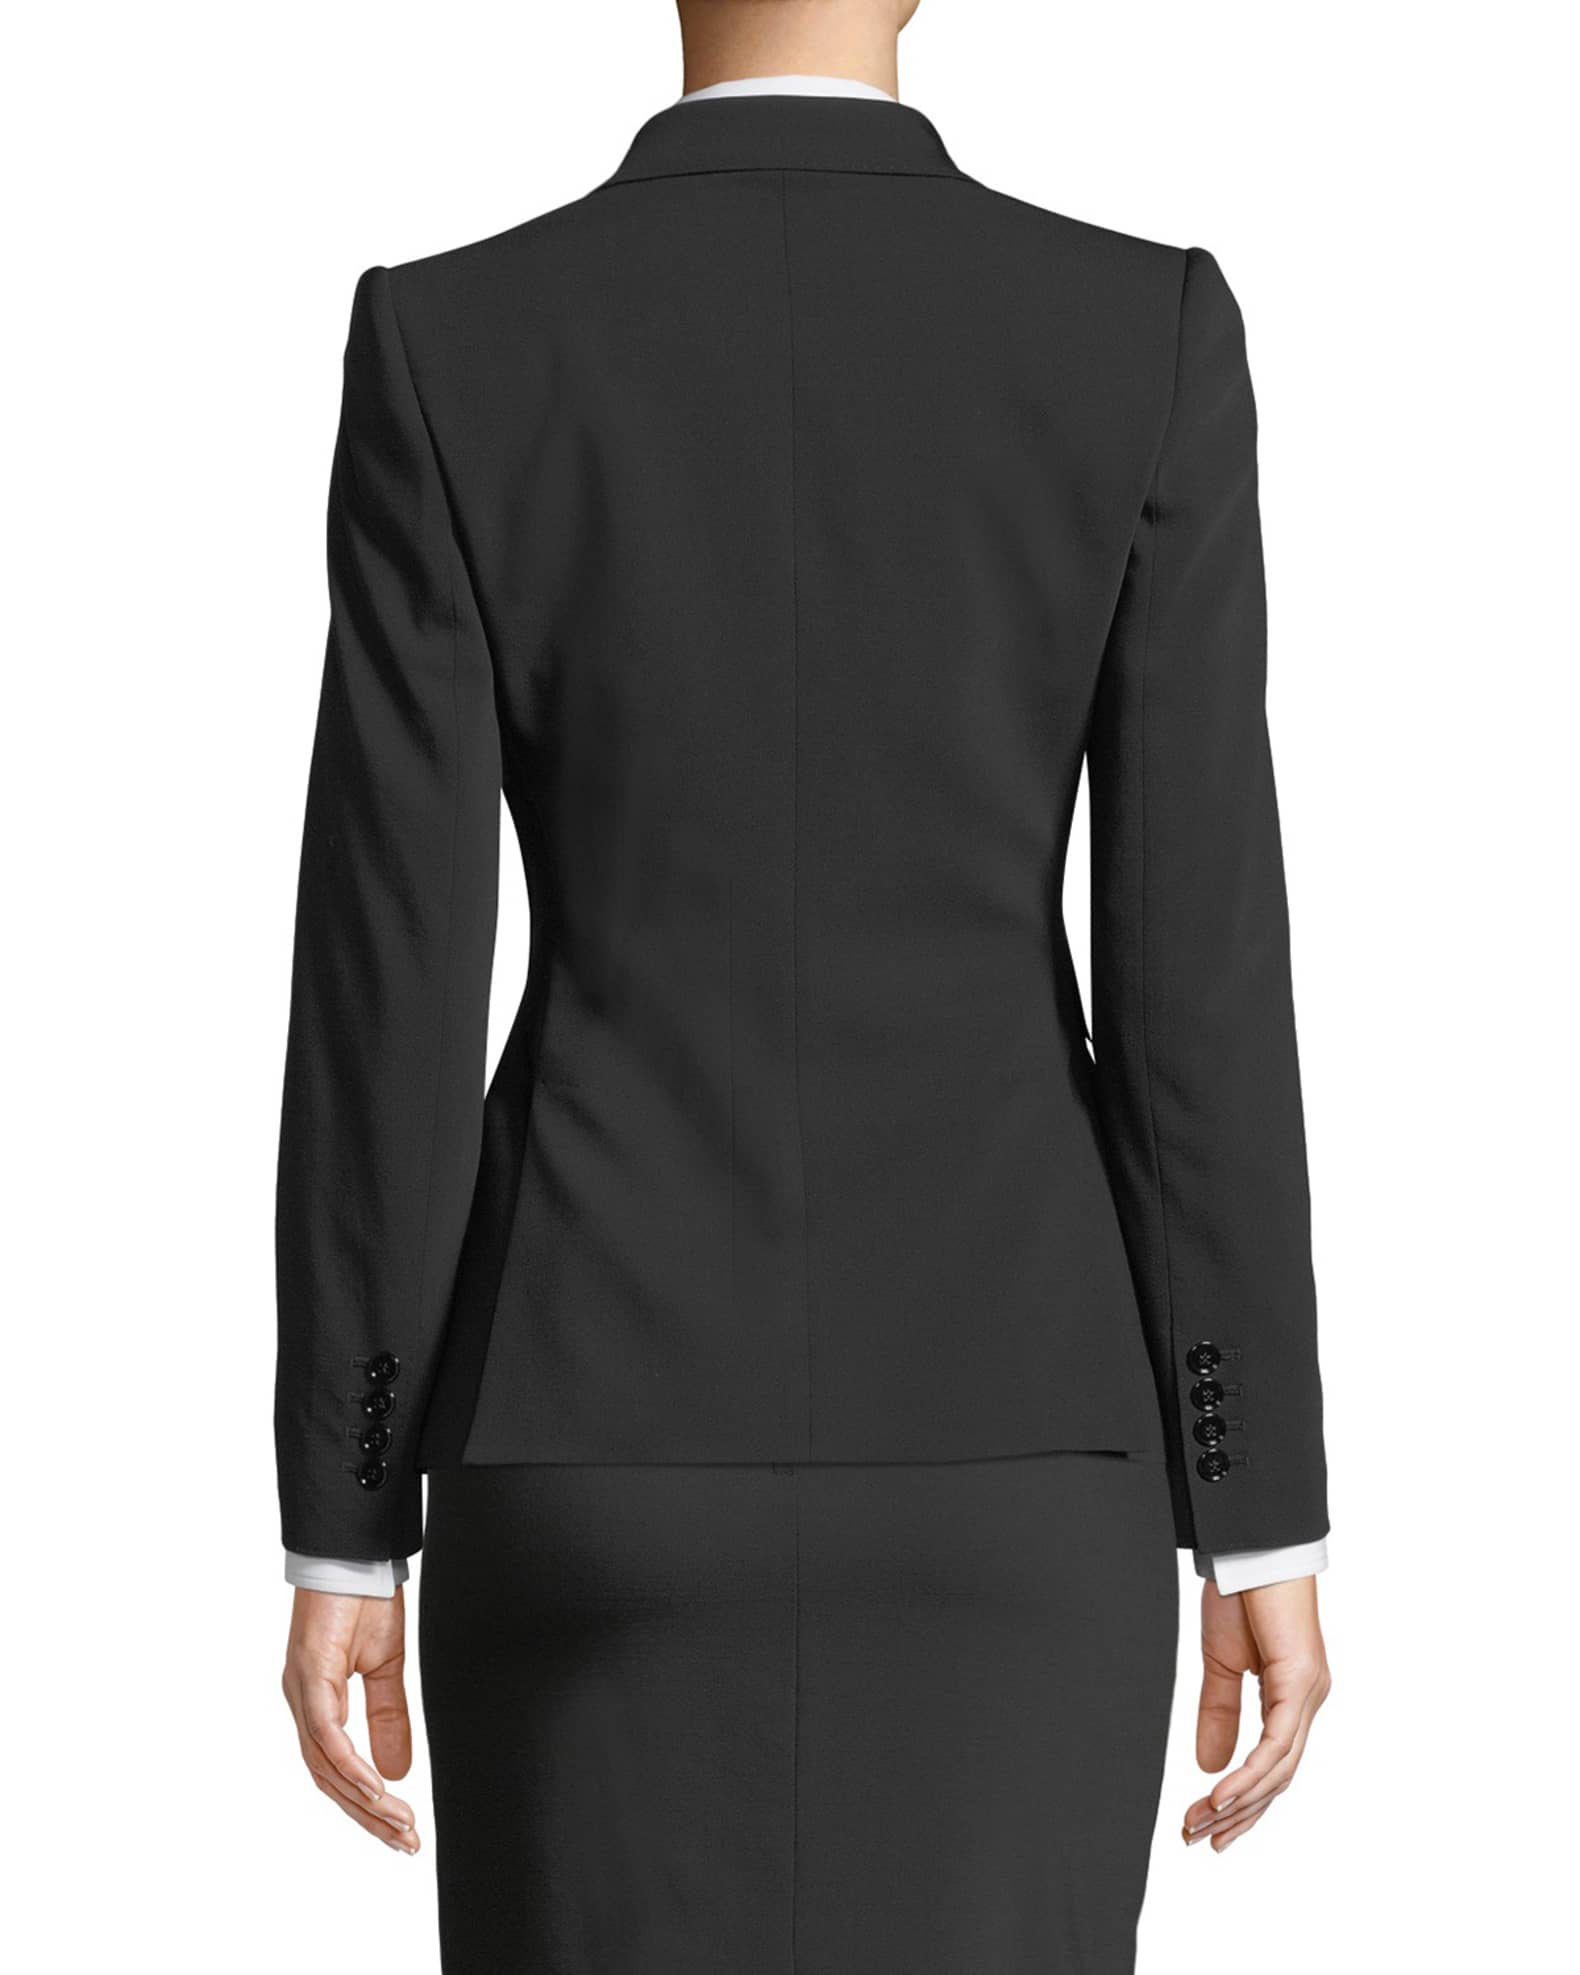 Turlington Two-Button Jacket and Matching Items | Neiman Marcus